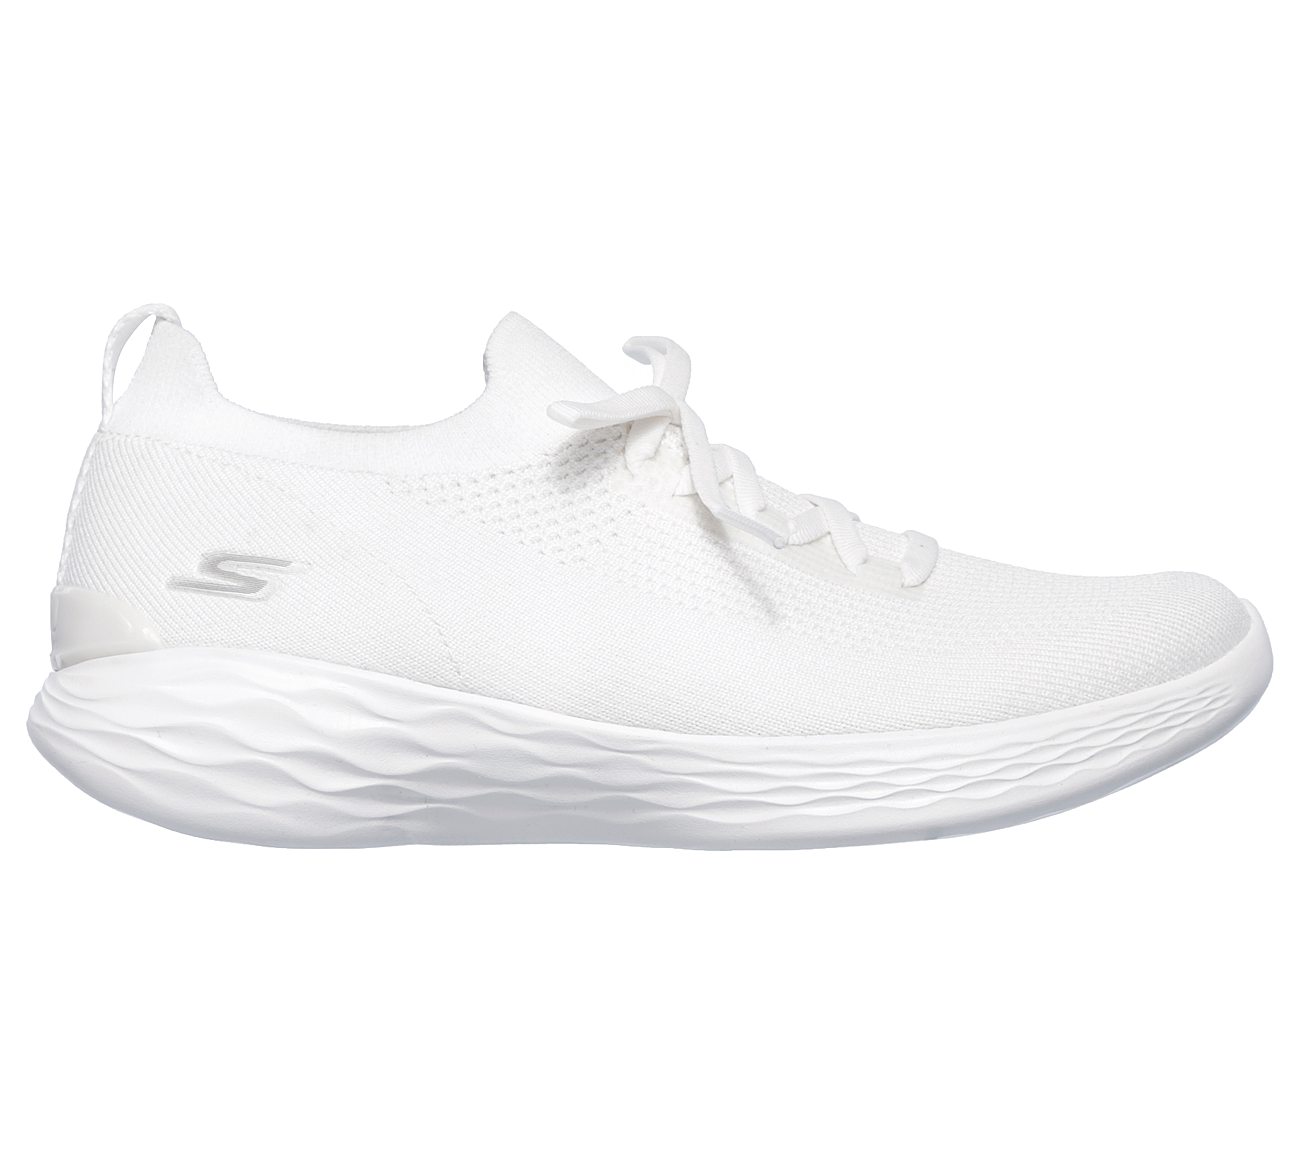 Buy SKECHERS YOU - Shine Lifestyle Shoes